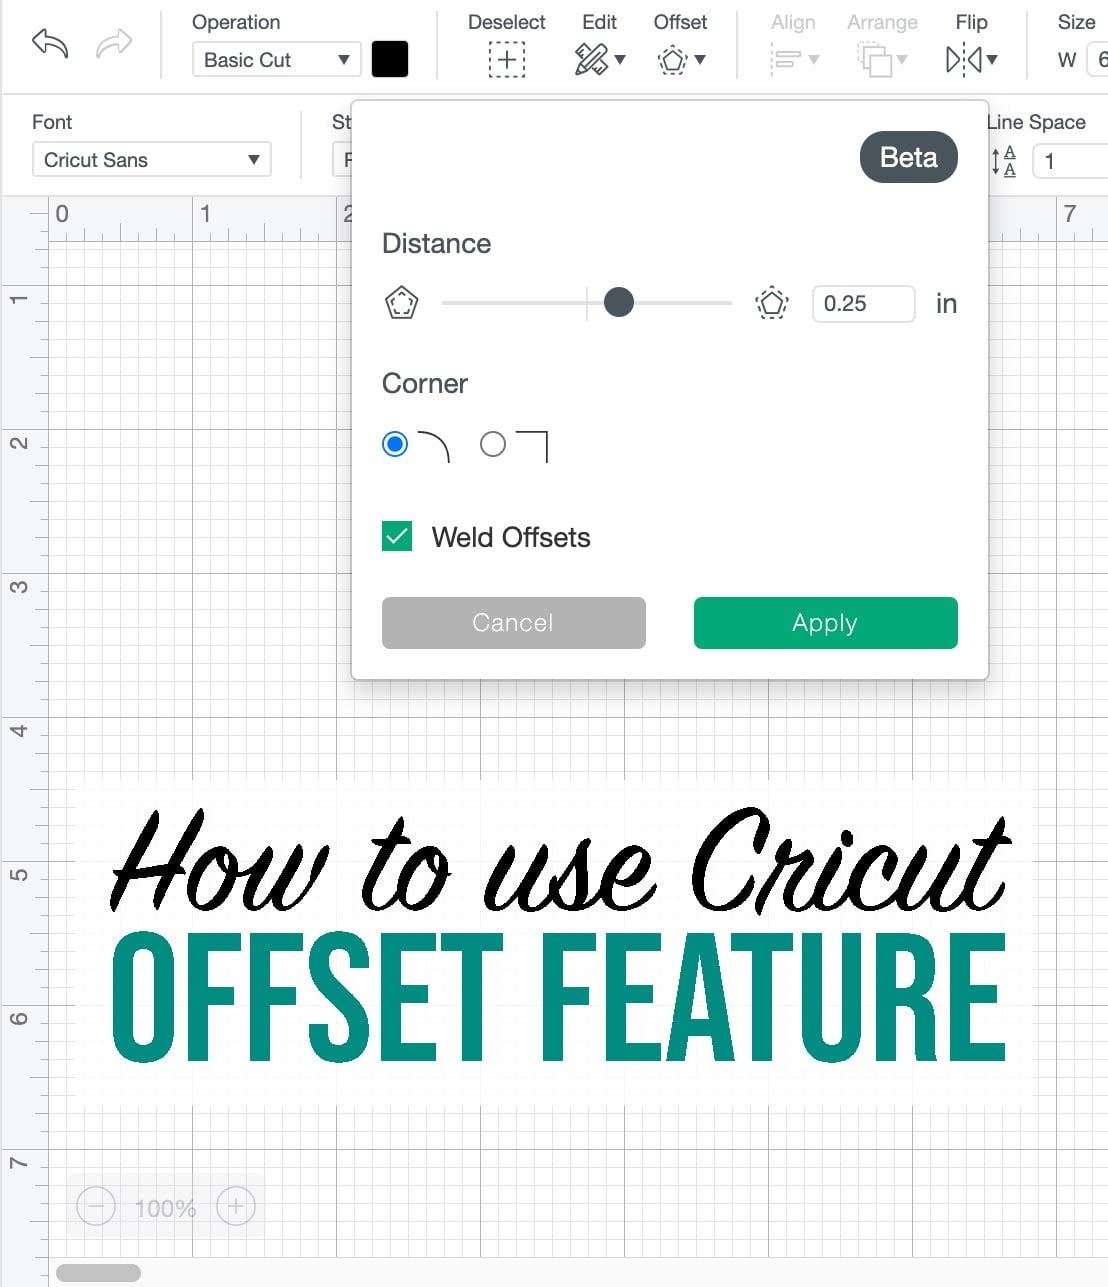 How to use Cricut offset feature